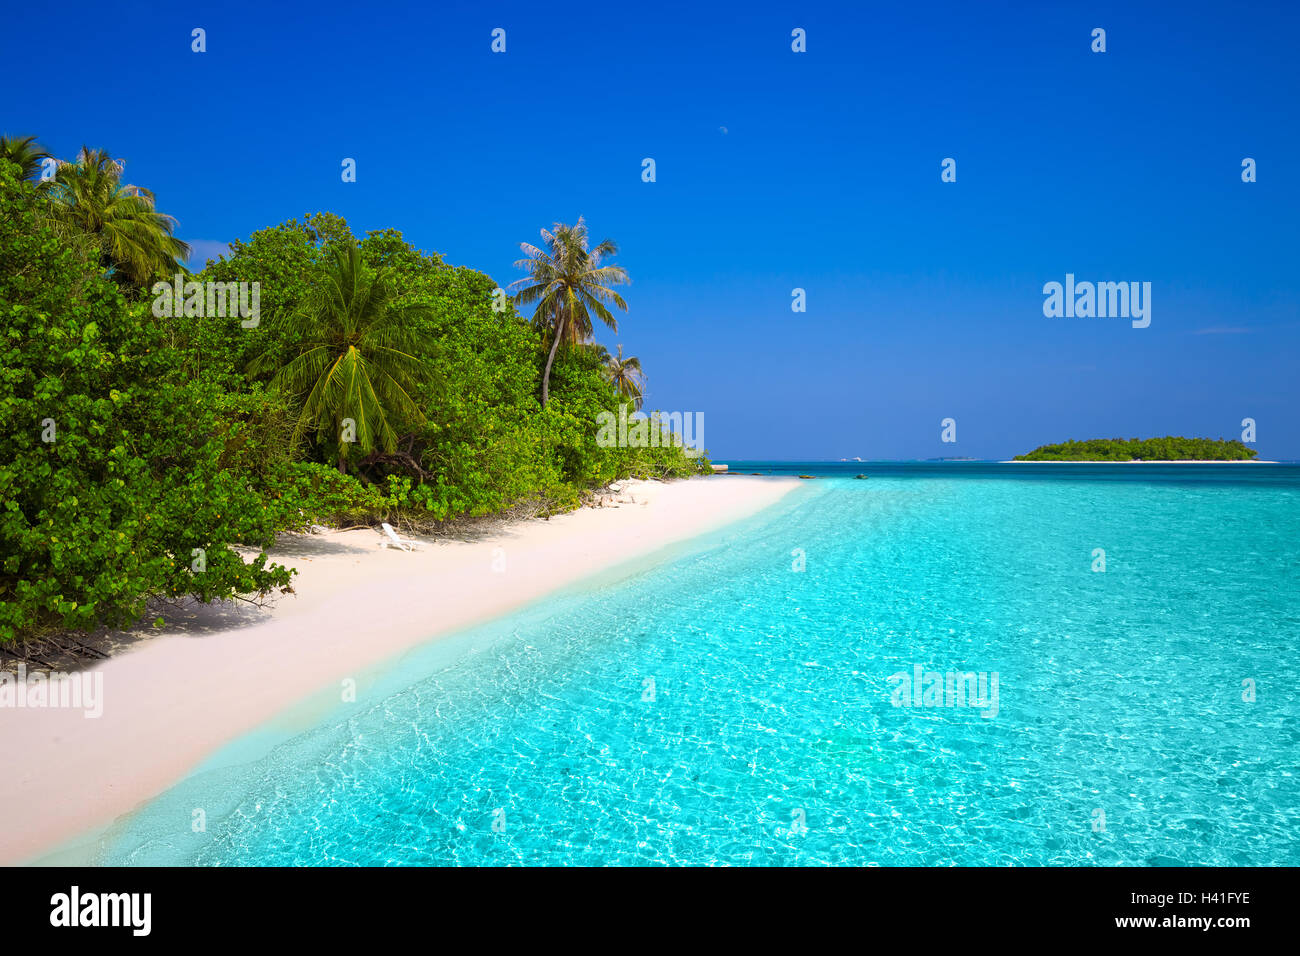 Tropical Maldives island with sandy beach with palm trees and turquoise clear water Stock Photo